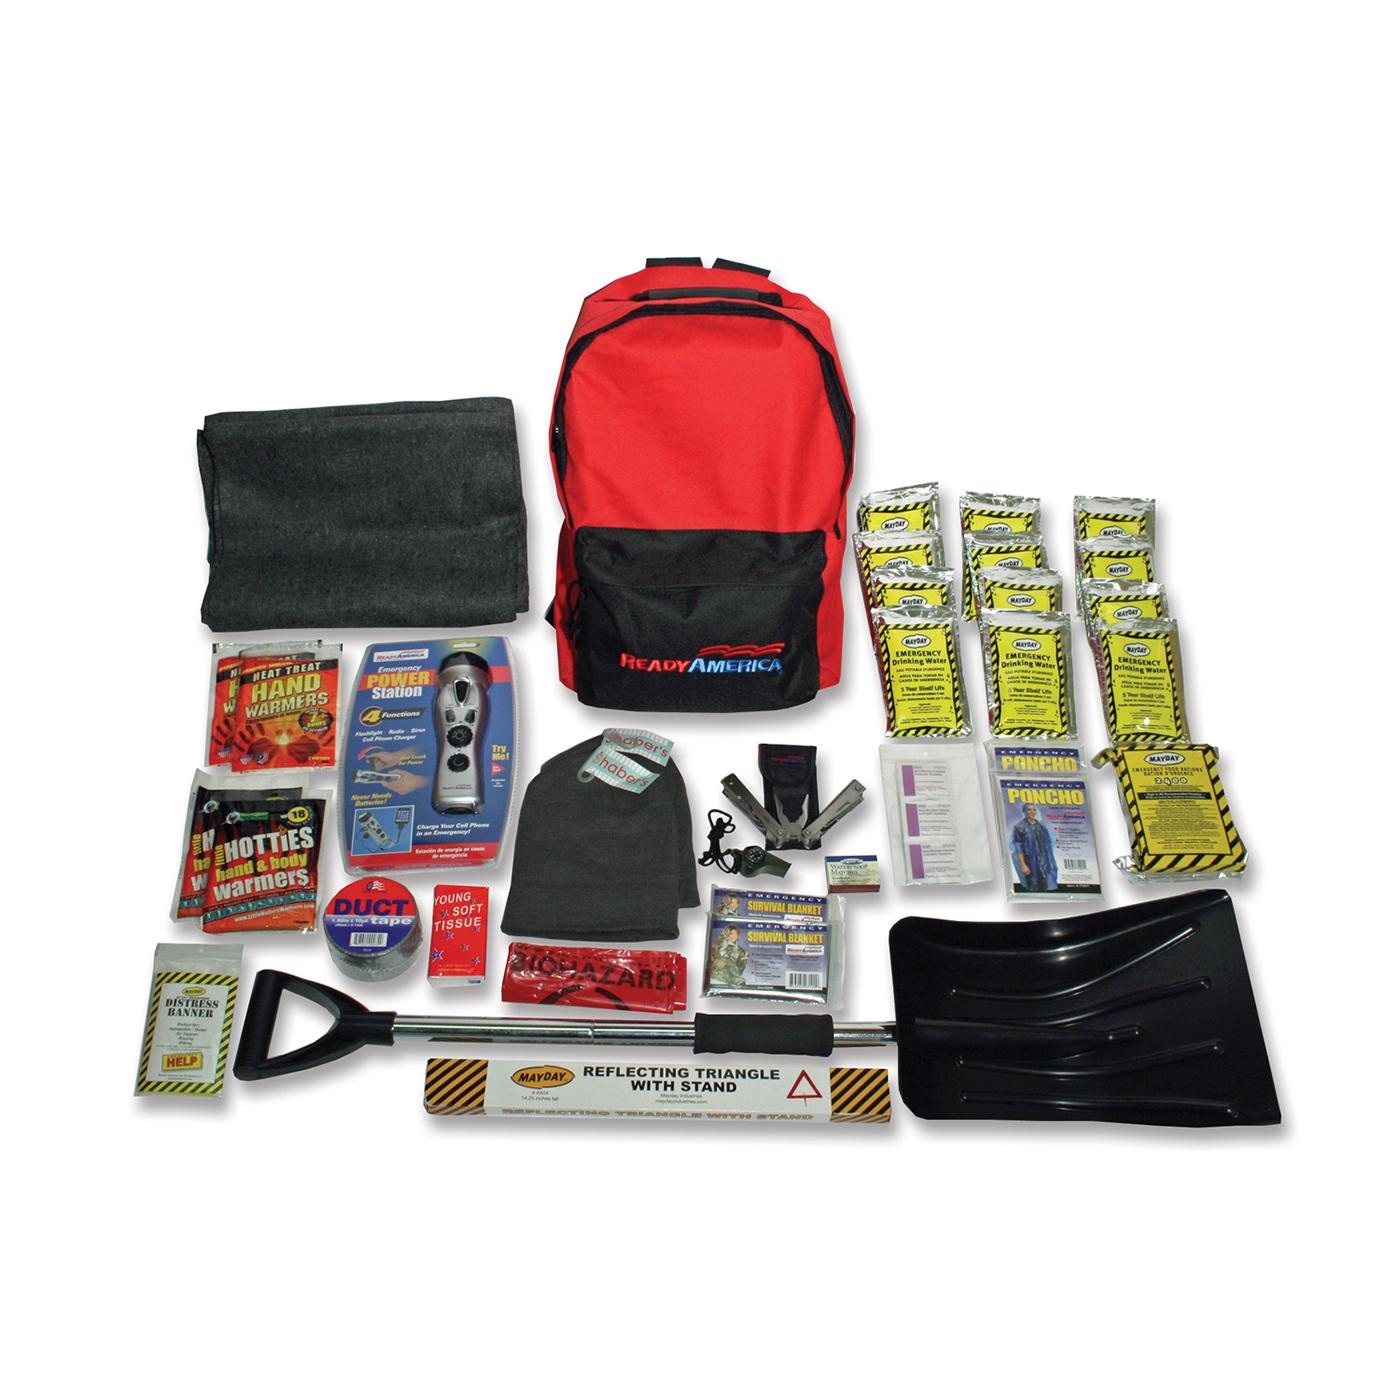 https://www.quakehold.com/wp-content/uploads/2021/06/products-cold-weather-survival-kit-2-person-2.gif.jpg